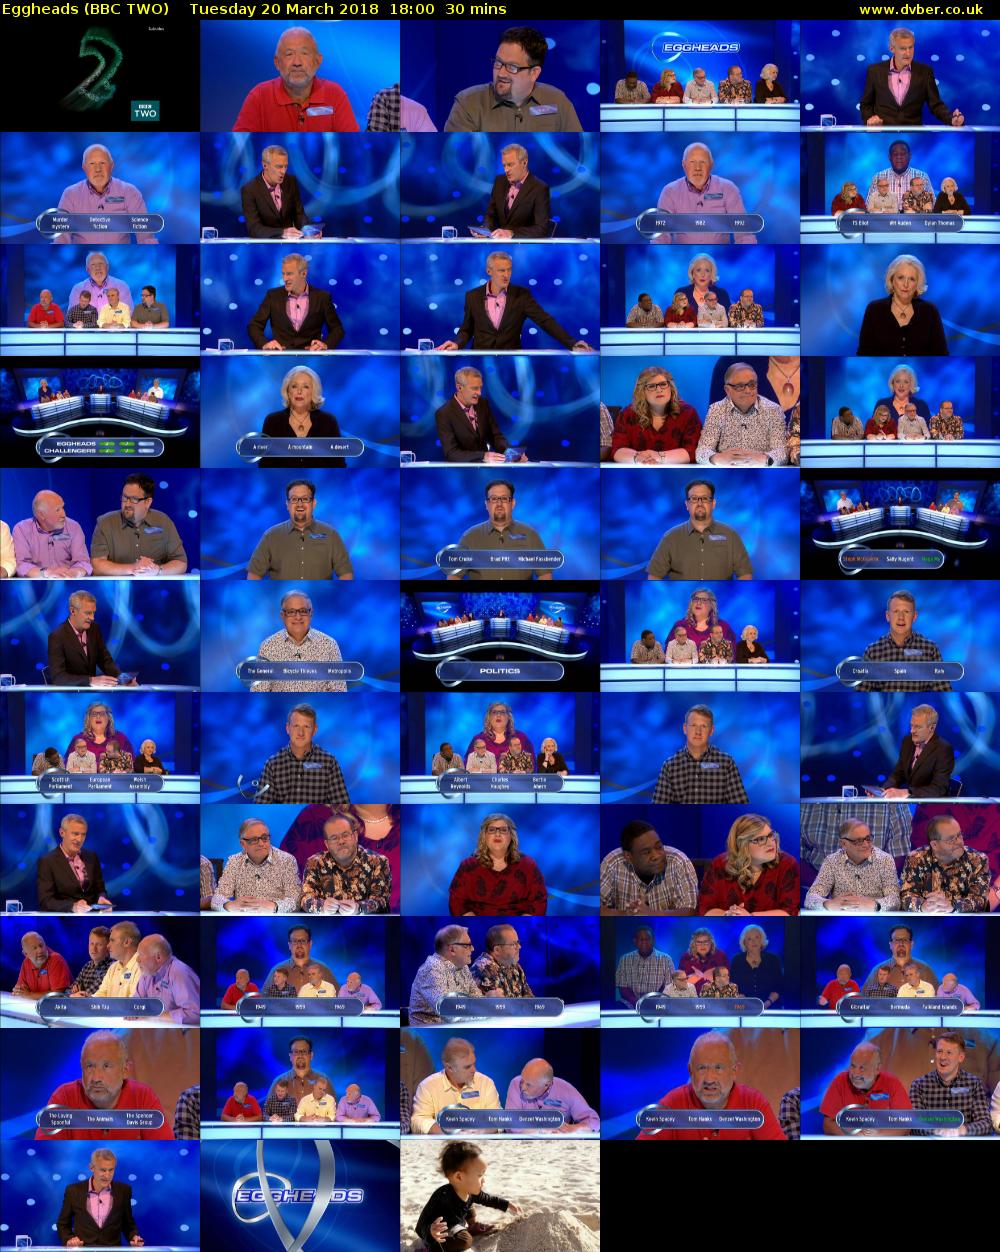 Eggheads (BBC TWO) Tuesday 20 March 2018 18:00 - 18:30